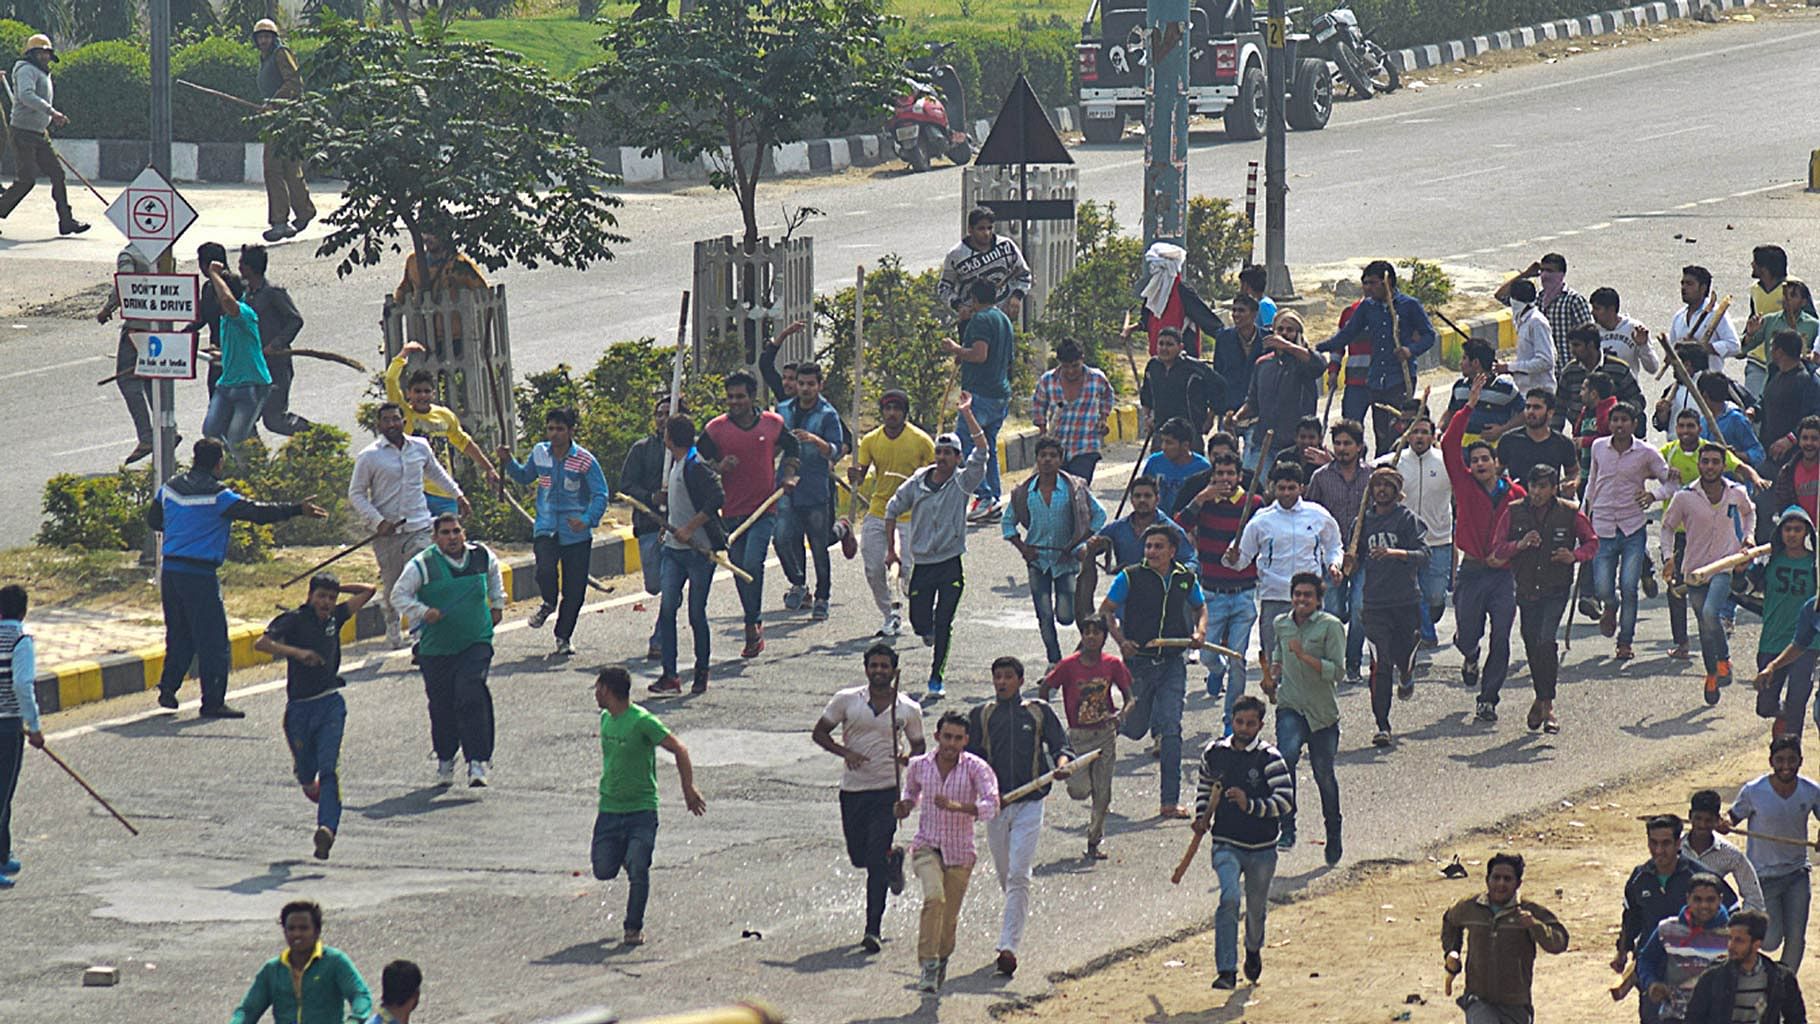  Protestors run  with sticks during a pro-caste quota protest in Rohtak. (Photo: AP)